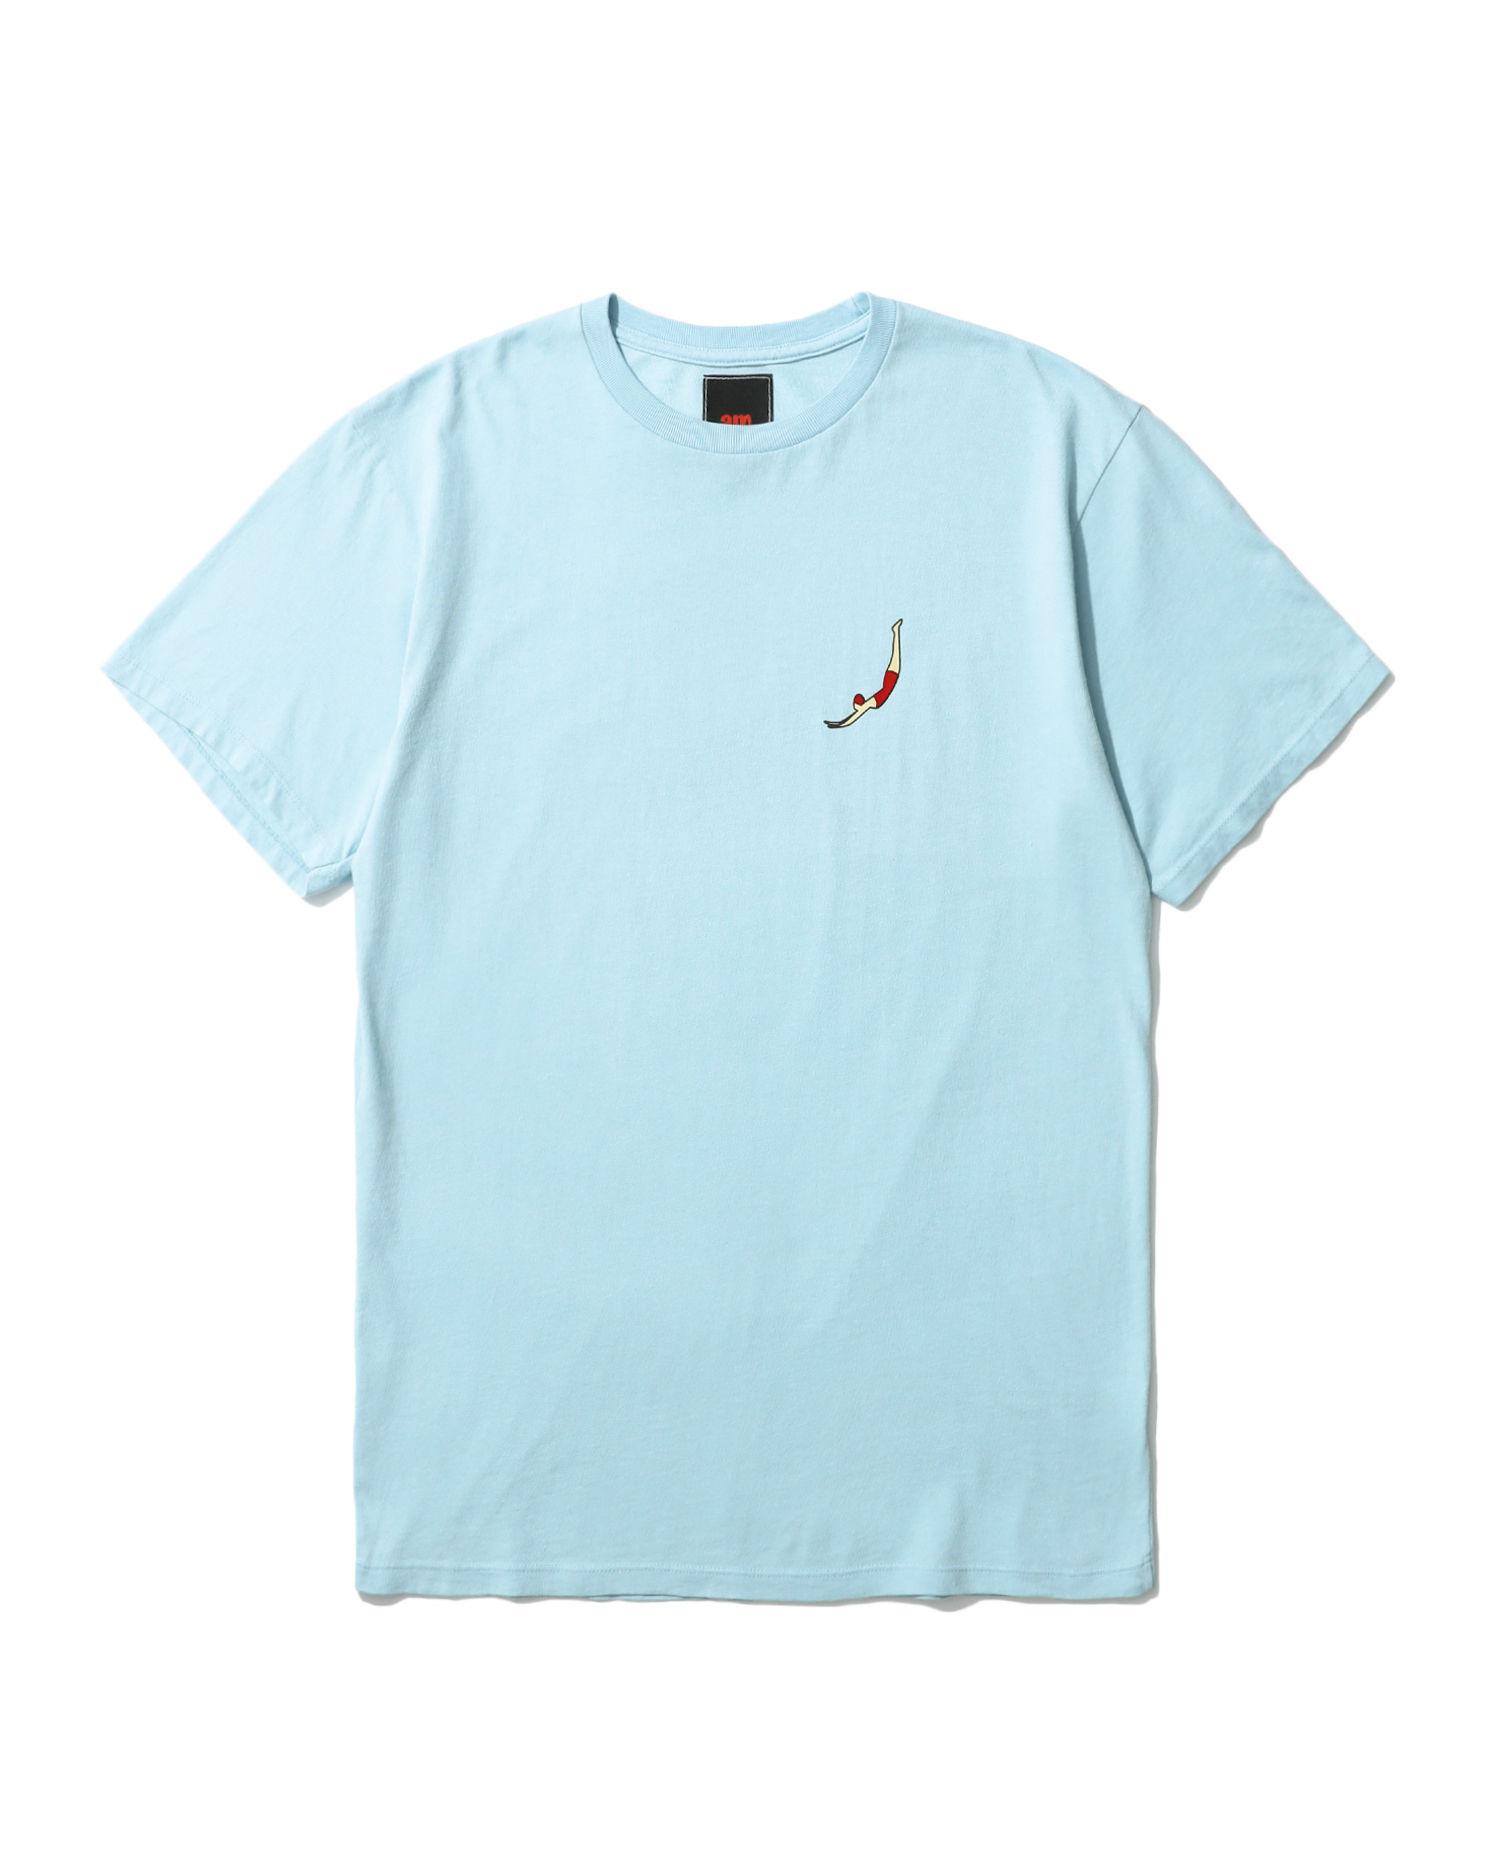 Swan Dive tee by AFTER MIDNIGHT